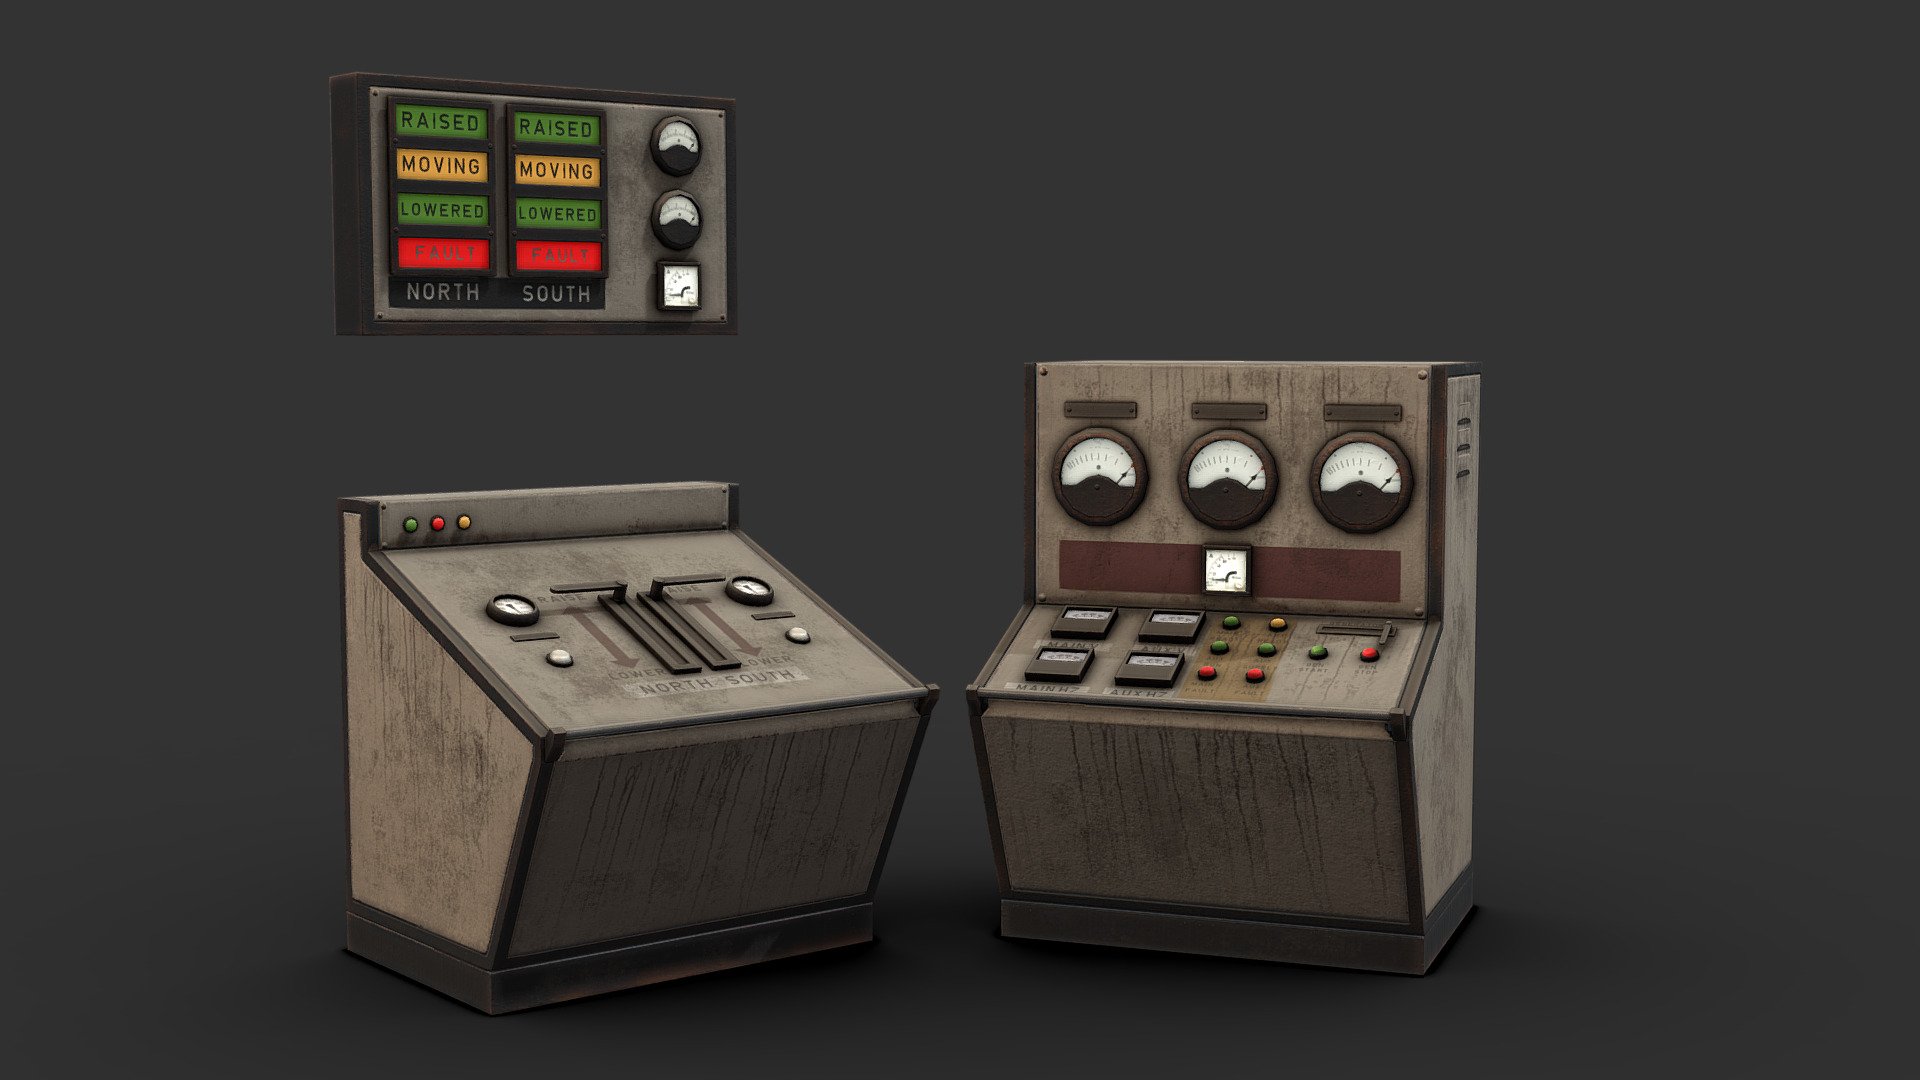 Commisssion for someone for use in Second Life

Made in 3DSMax and Substance Painter

Questions? Interested in a custom model? Want me working on your project? Feel free to contact me via artstation at: https://www.artstation.com/renafox3d - Generator/Bridge Control Panels - 3D model by Renafox (@kryik1023) 3d model